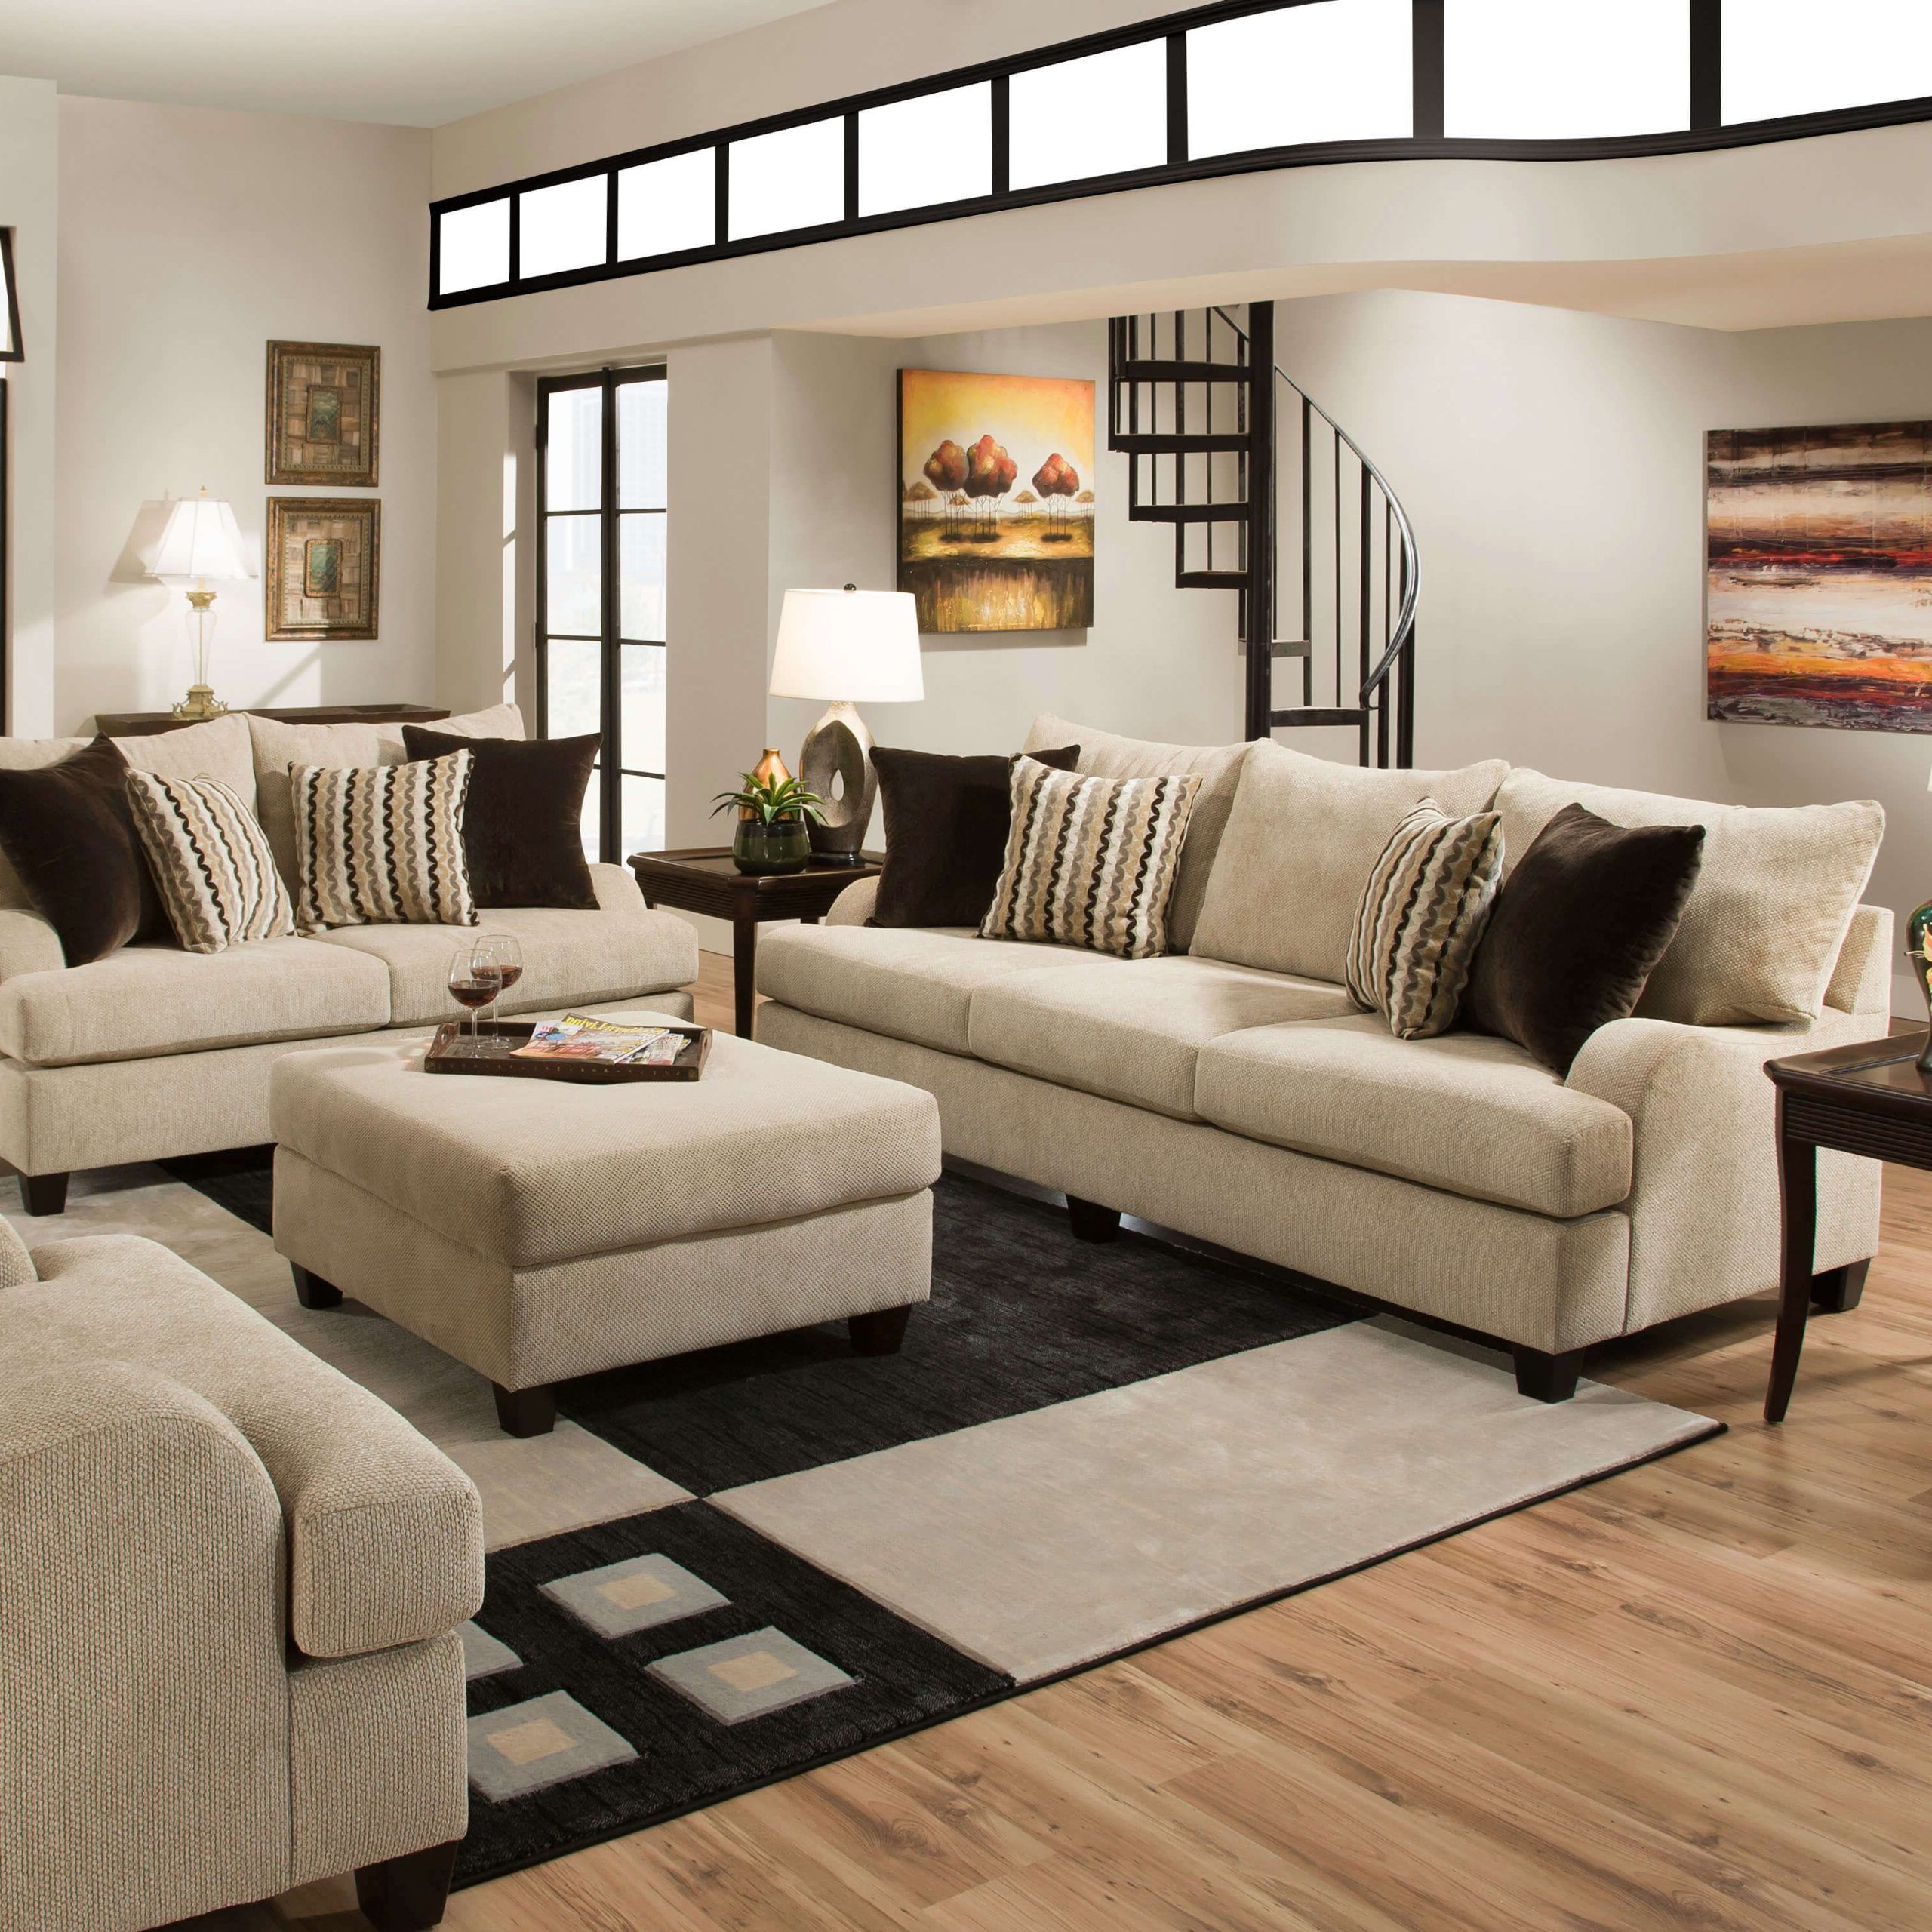 Simmons Trinidad Taupe Living Room Set | Wohnzimmer Gestalten, Sofa Throughout Sofas For Living Rooms (View 14 of 20)